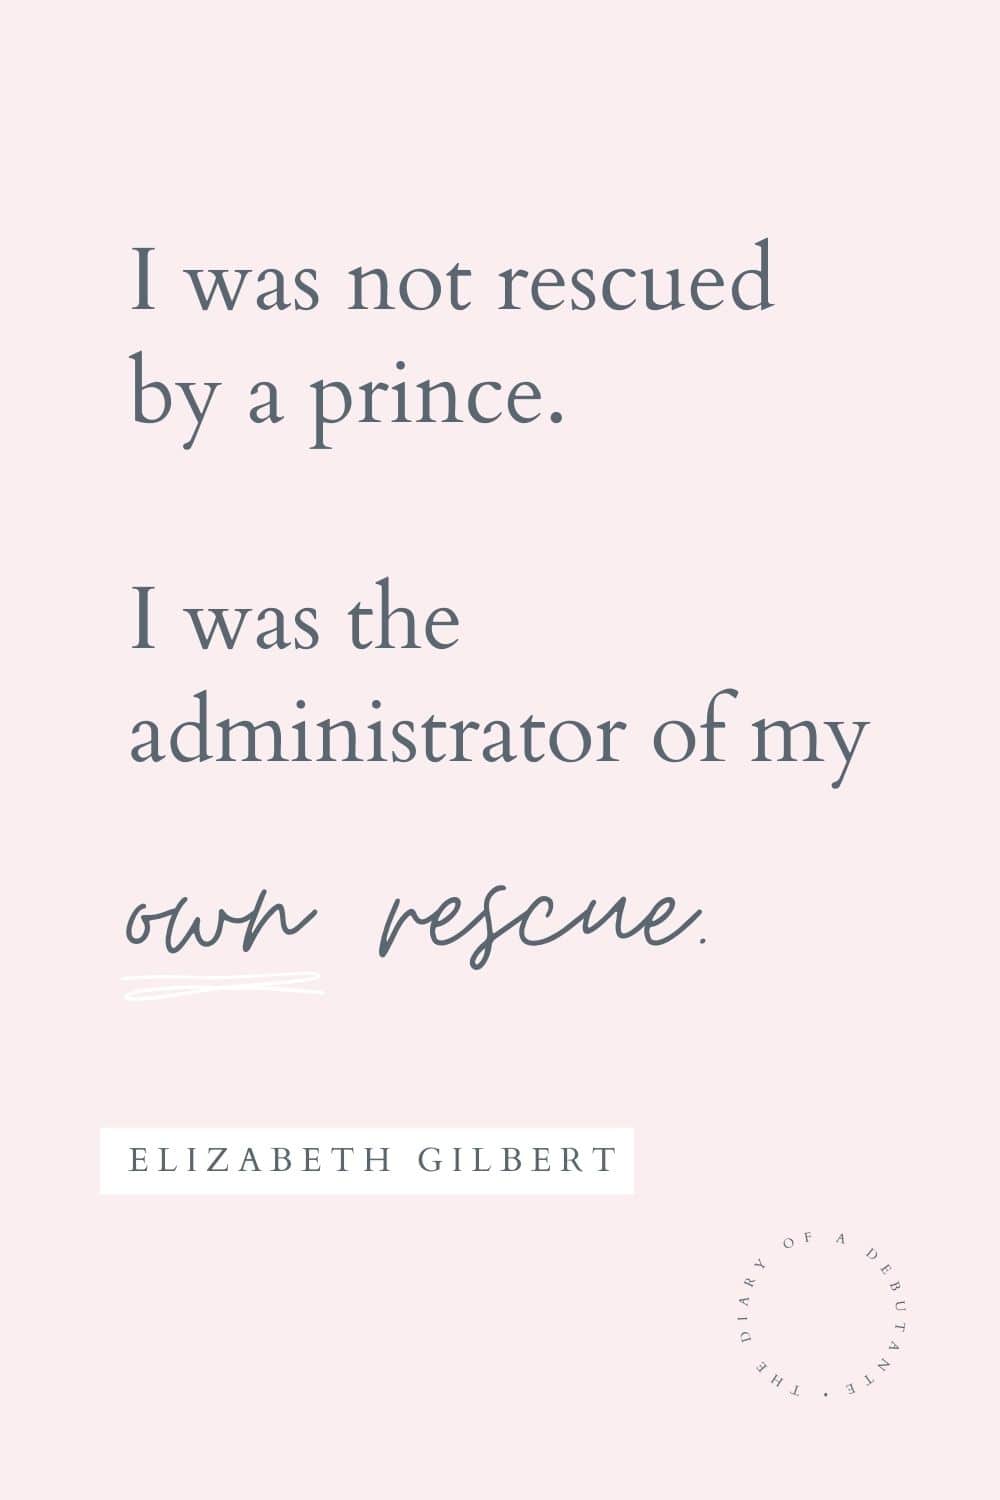 Inspirational Elizabeth Gilbert quote curated by blogger Stephanie Ziajka for Women's History Month on Diary of a Debutante